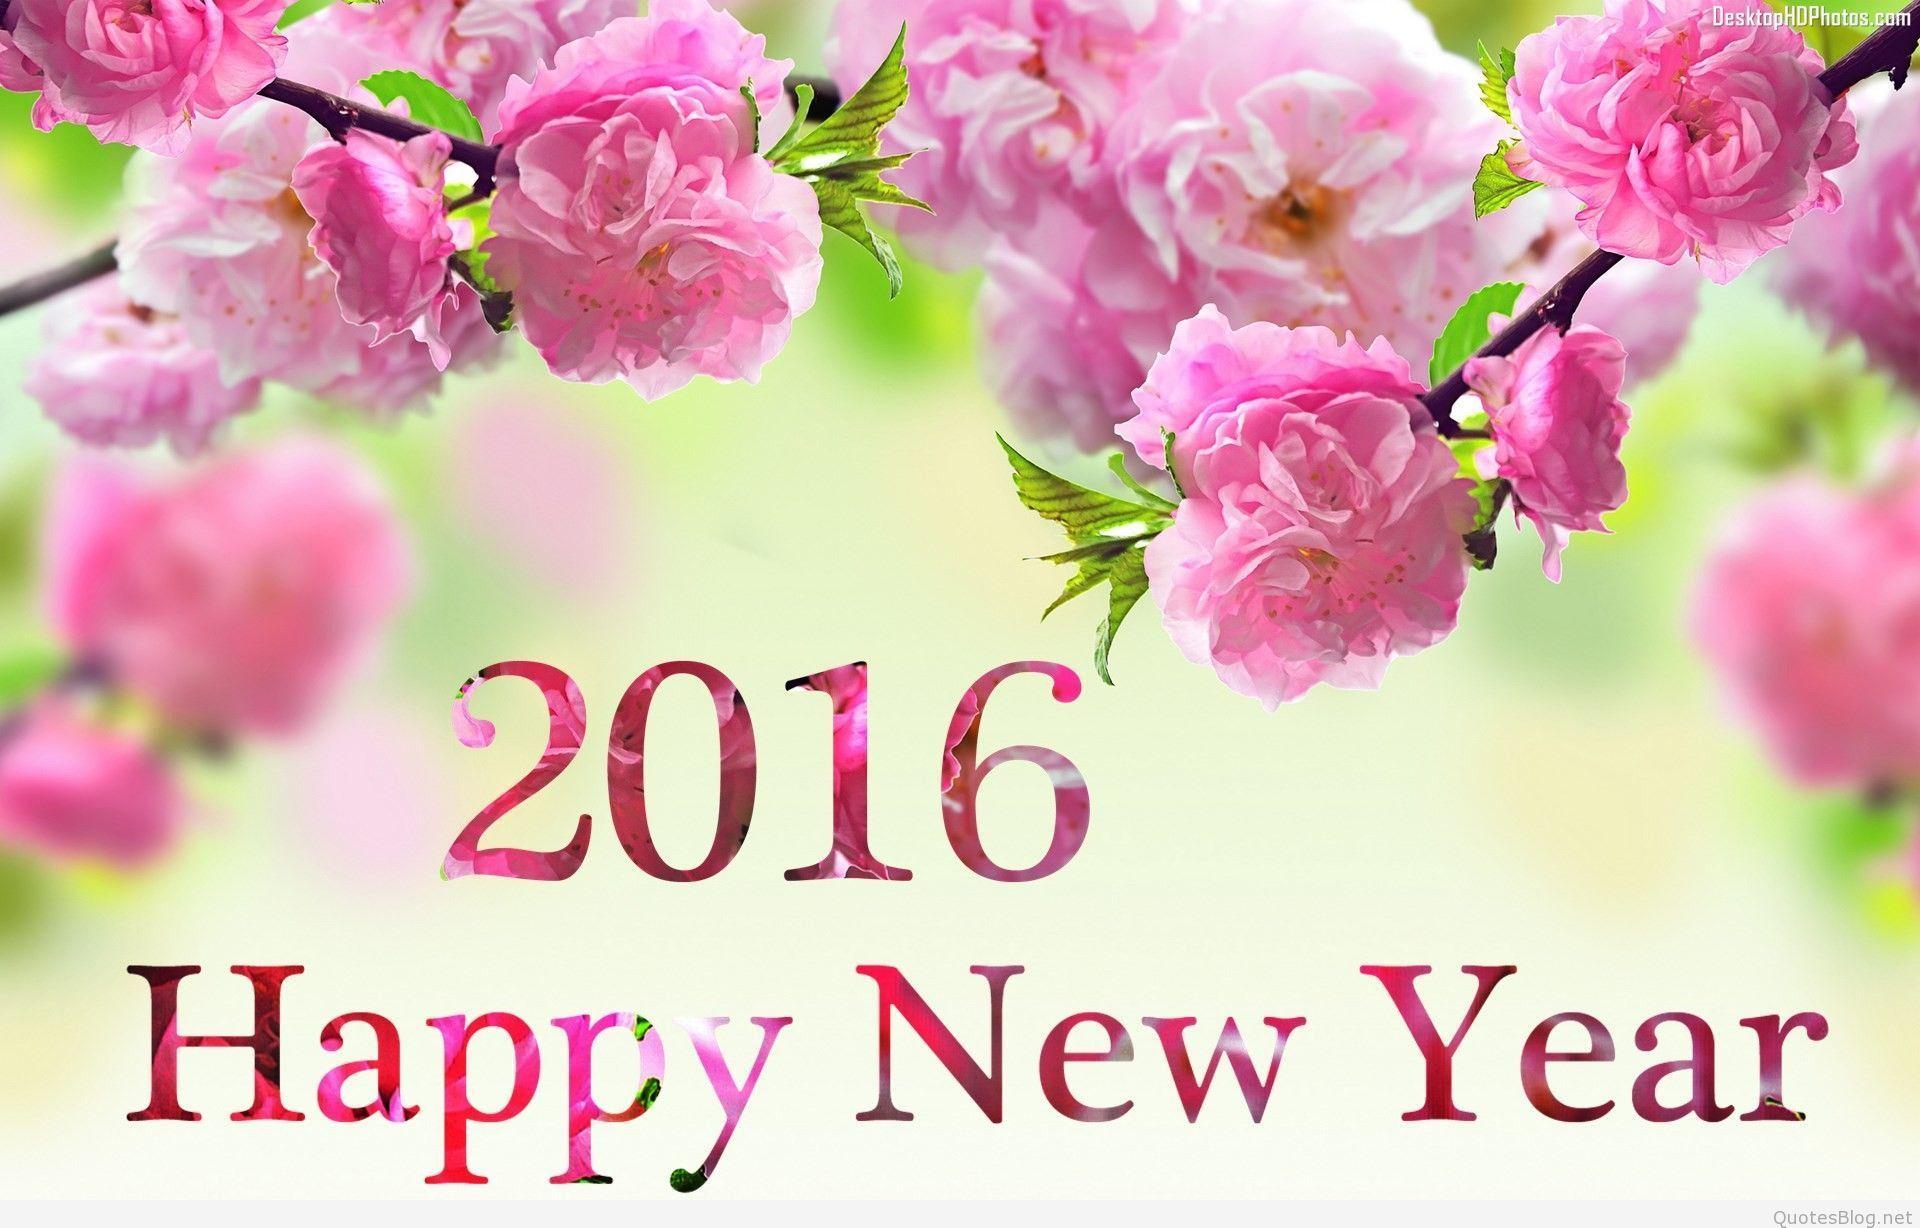 Background Happy new year 2016 wishes & messages